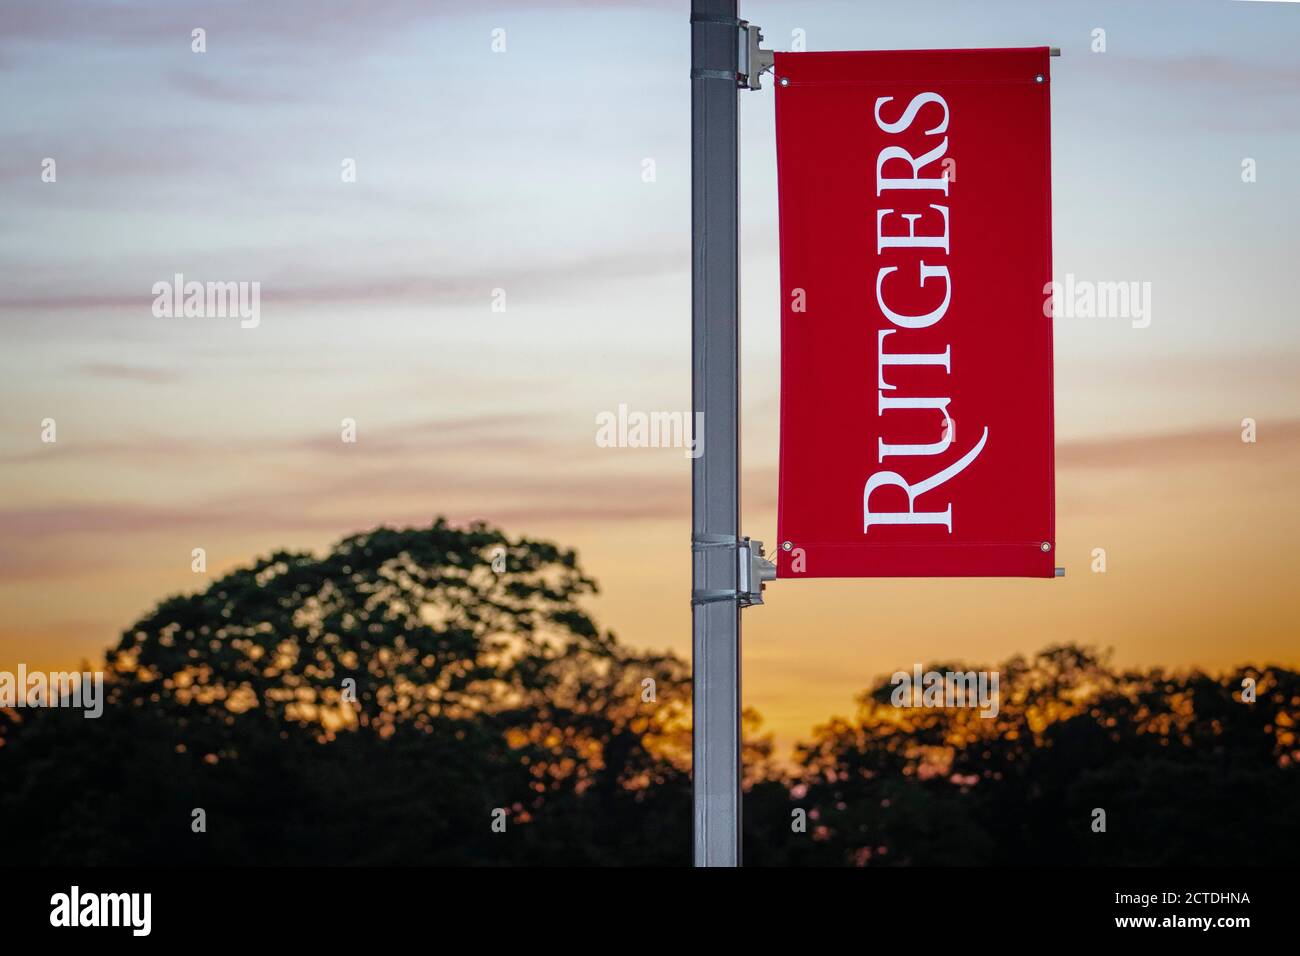 Rutgers University logo on banner against colorful skies Stock Photo